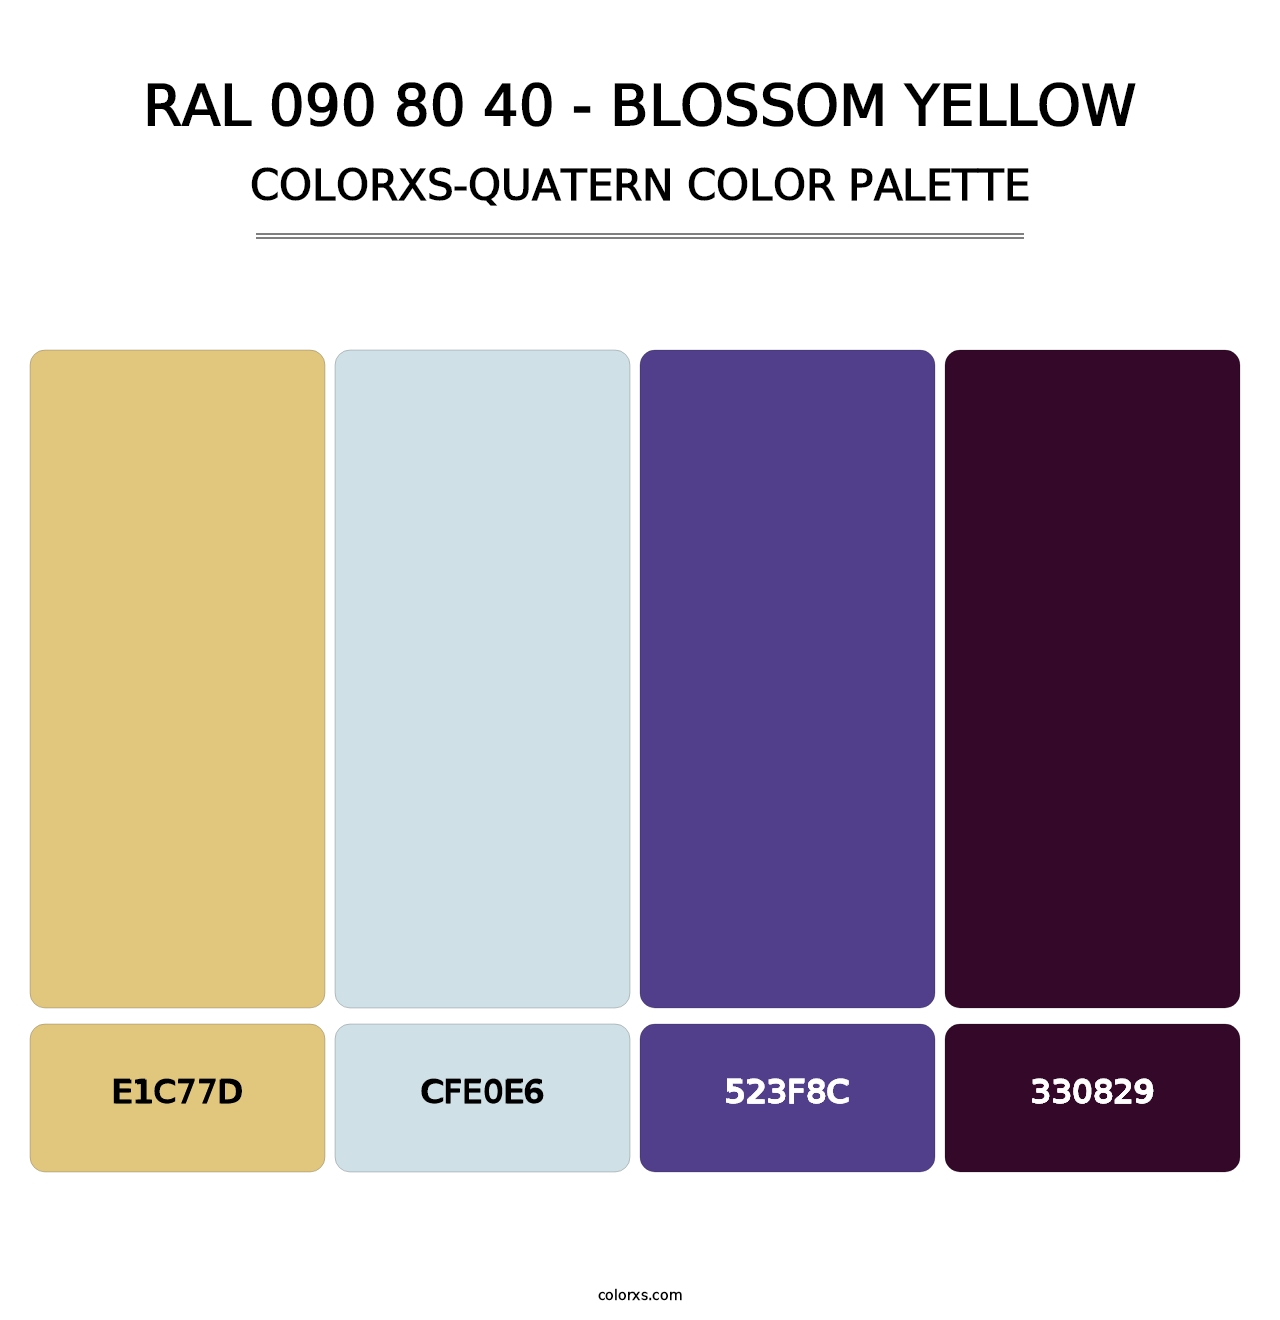 RAL 090 80 40 - Blossom Yellow - Colorxs Quatern Palette